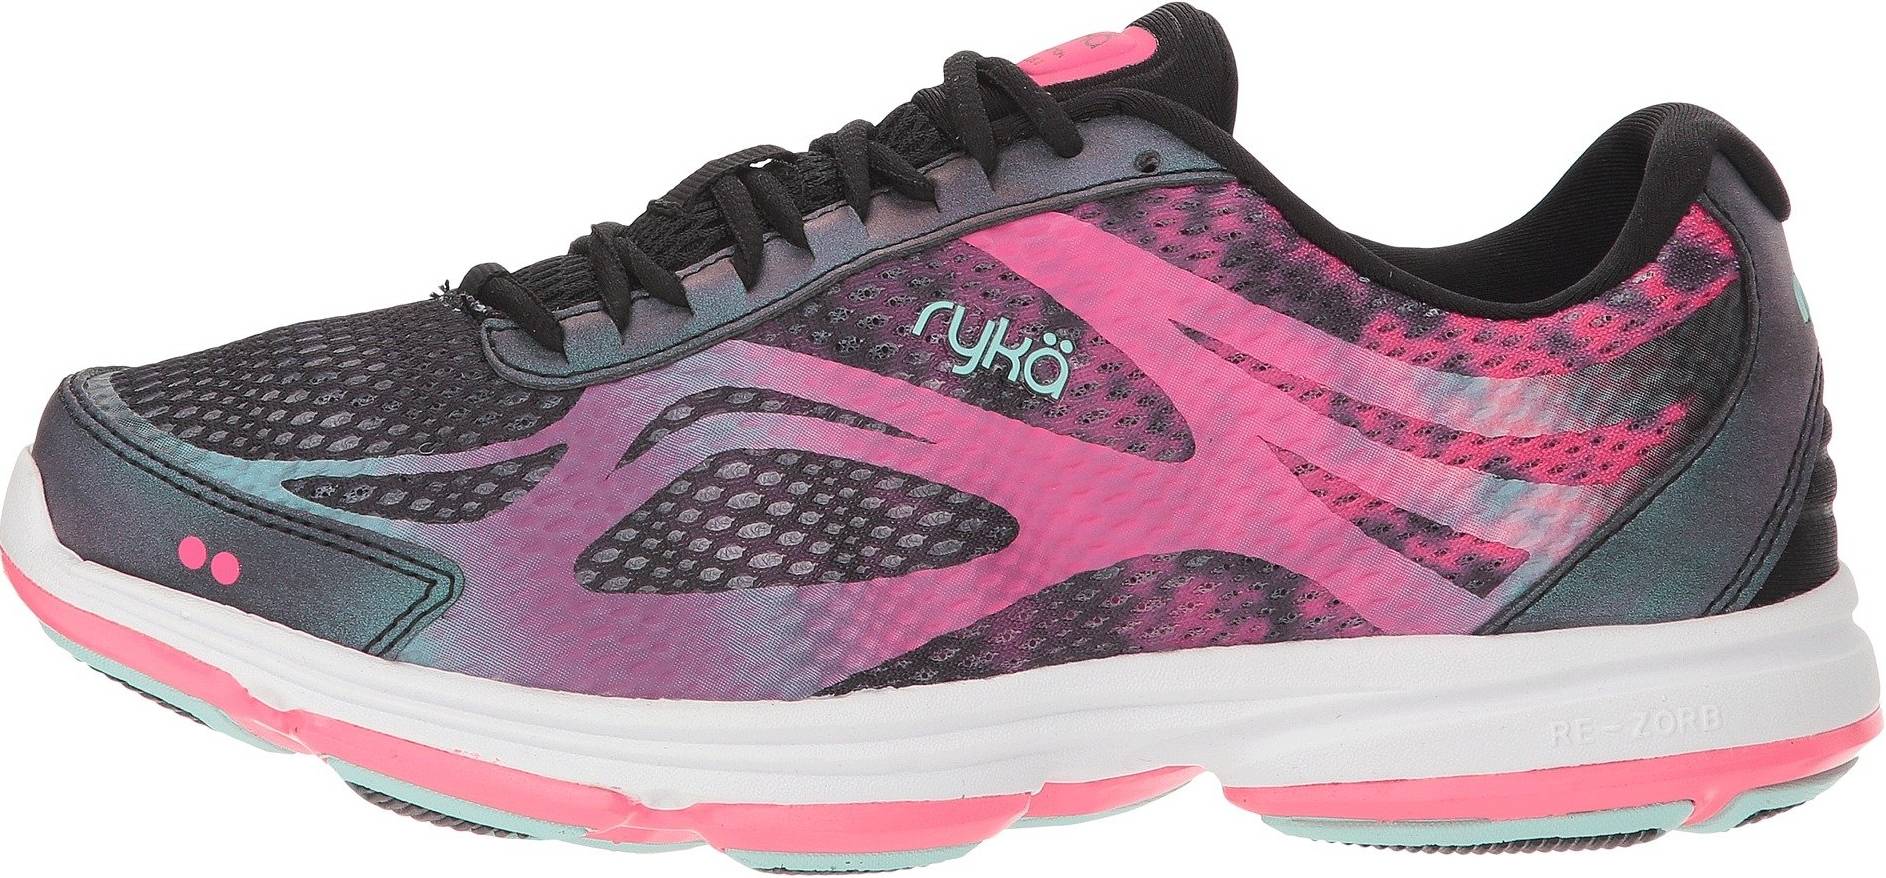 ryka stability shoes